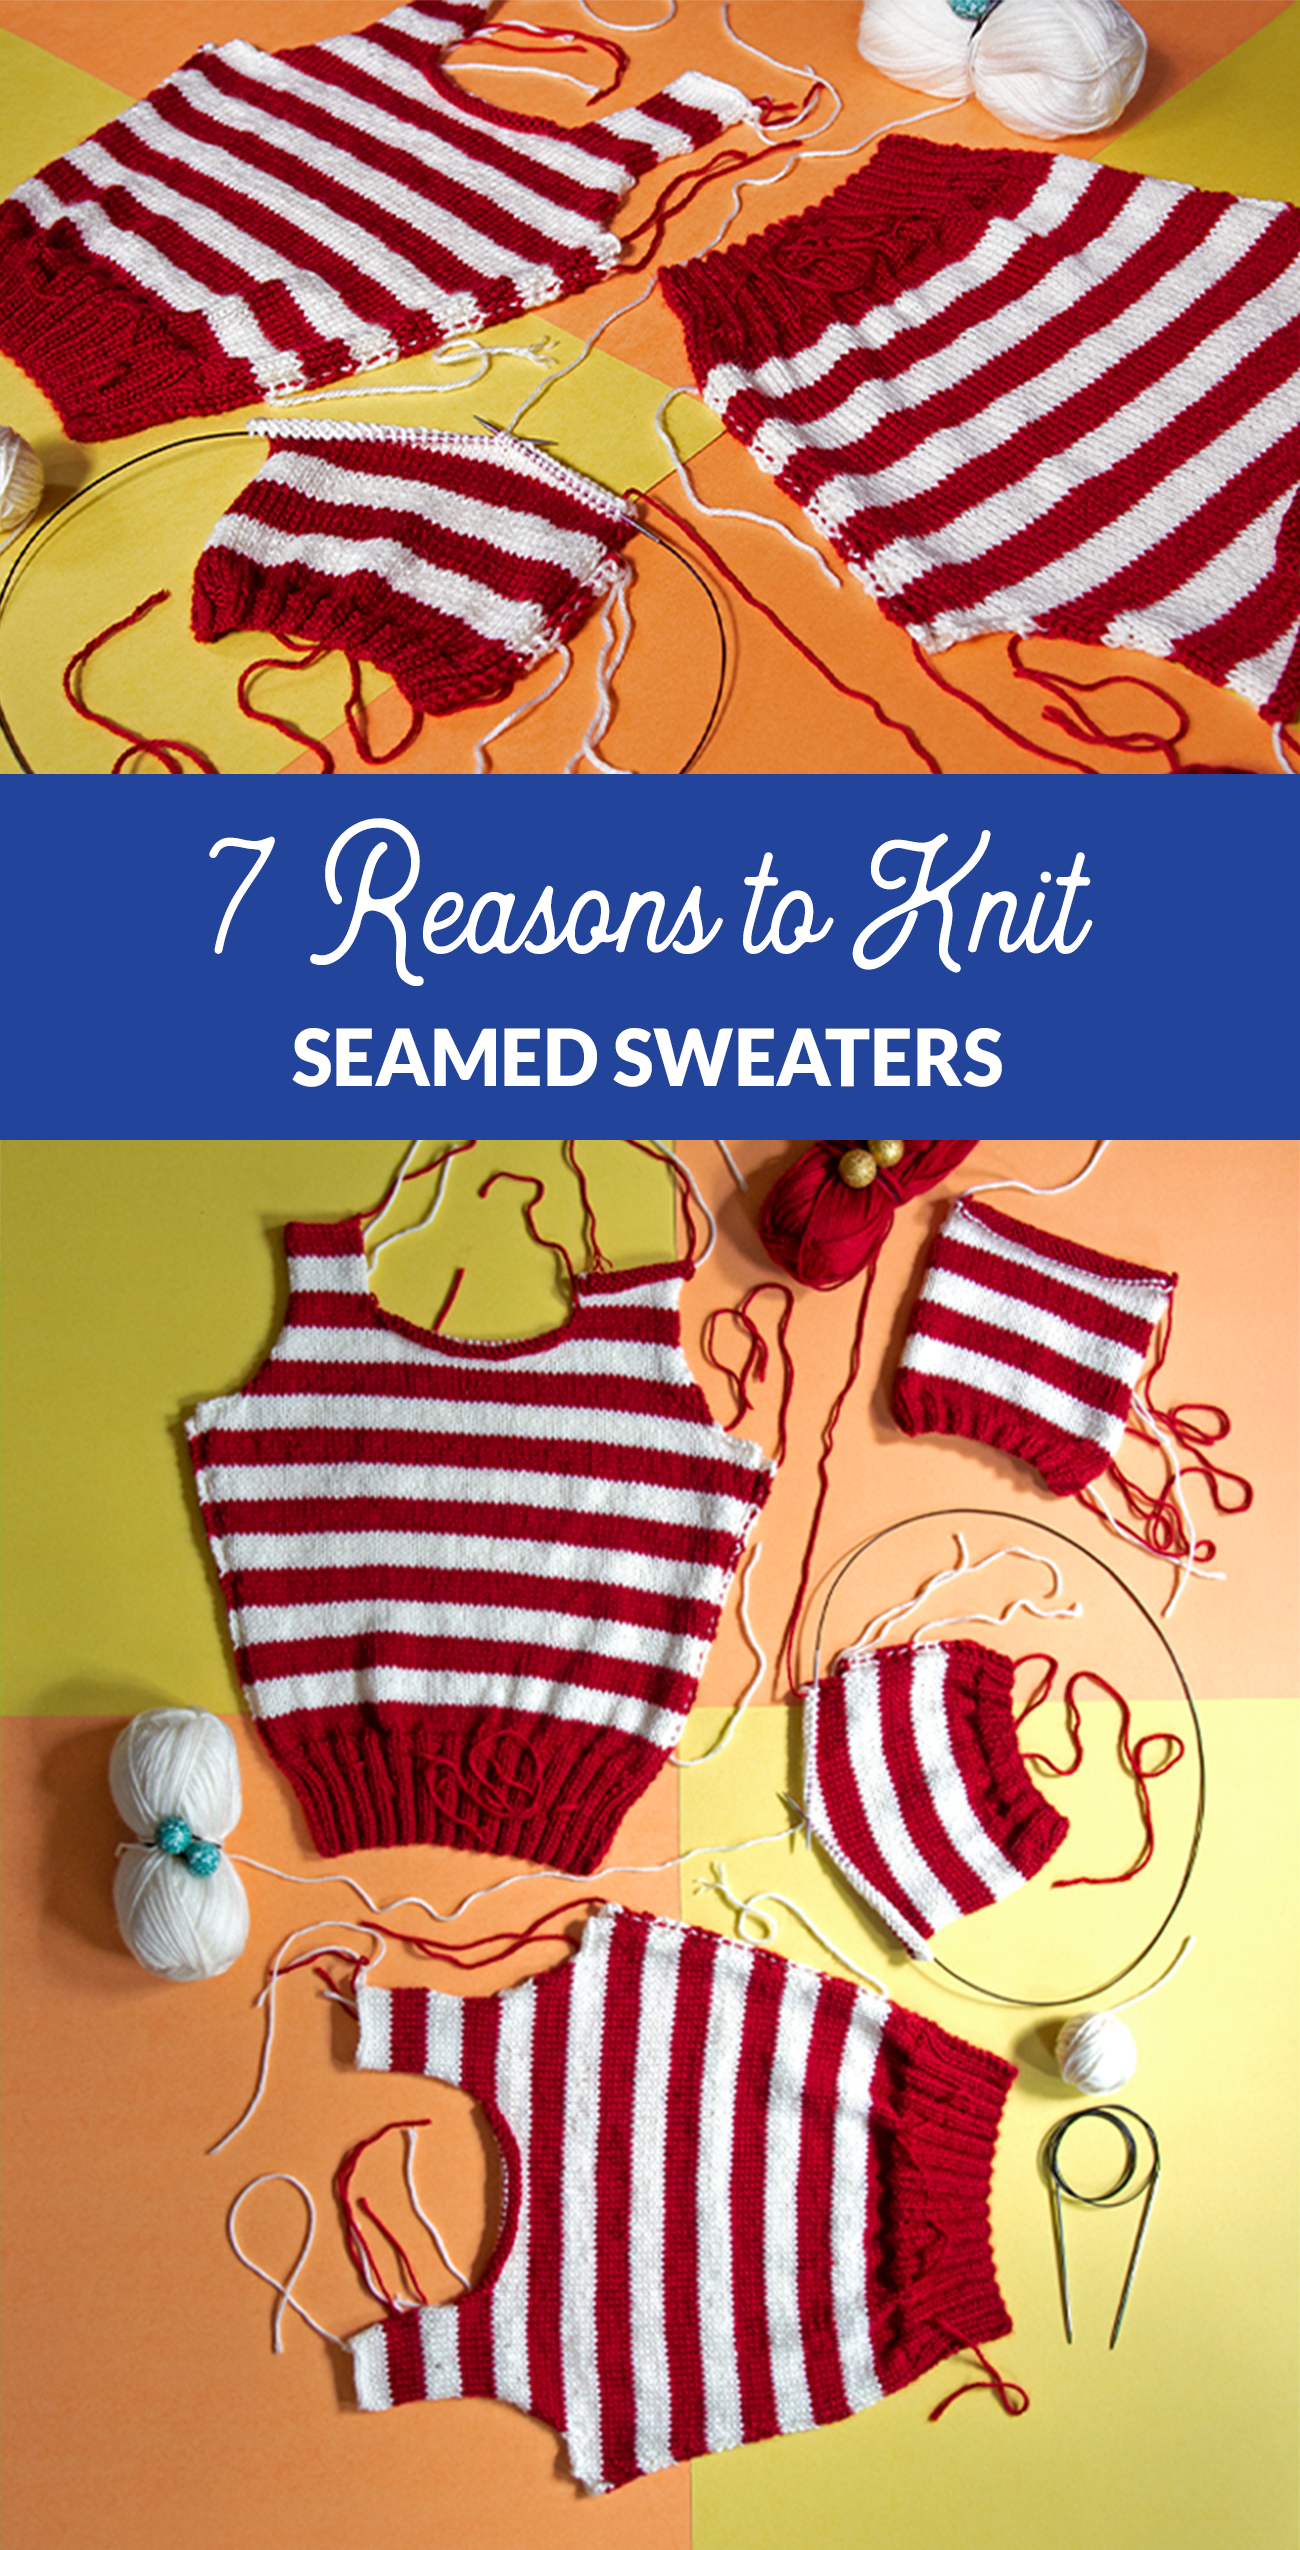 Sometimes it may seem like seamless sweaters are the only way to go, but let's take a look at 7 reasons to knit a seamed sweater - you might find yourself ready to mix up your making!